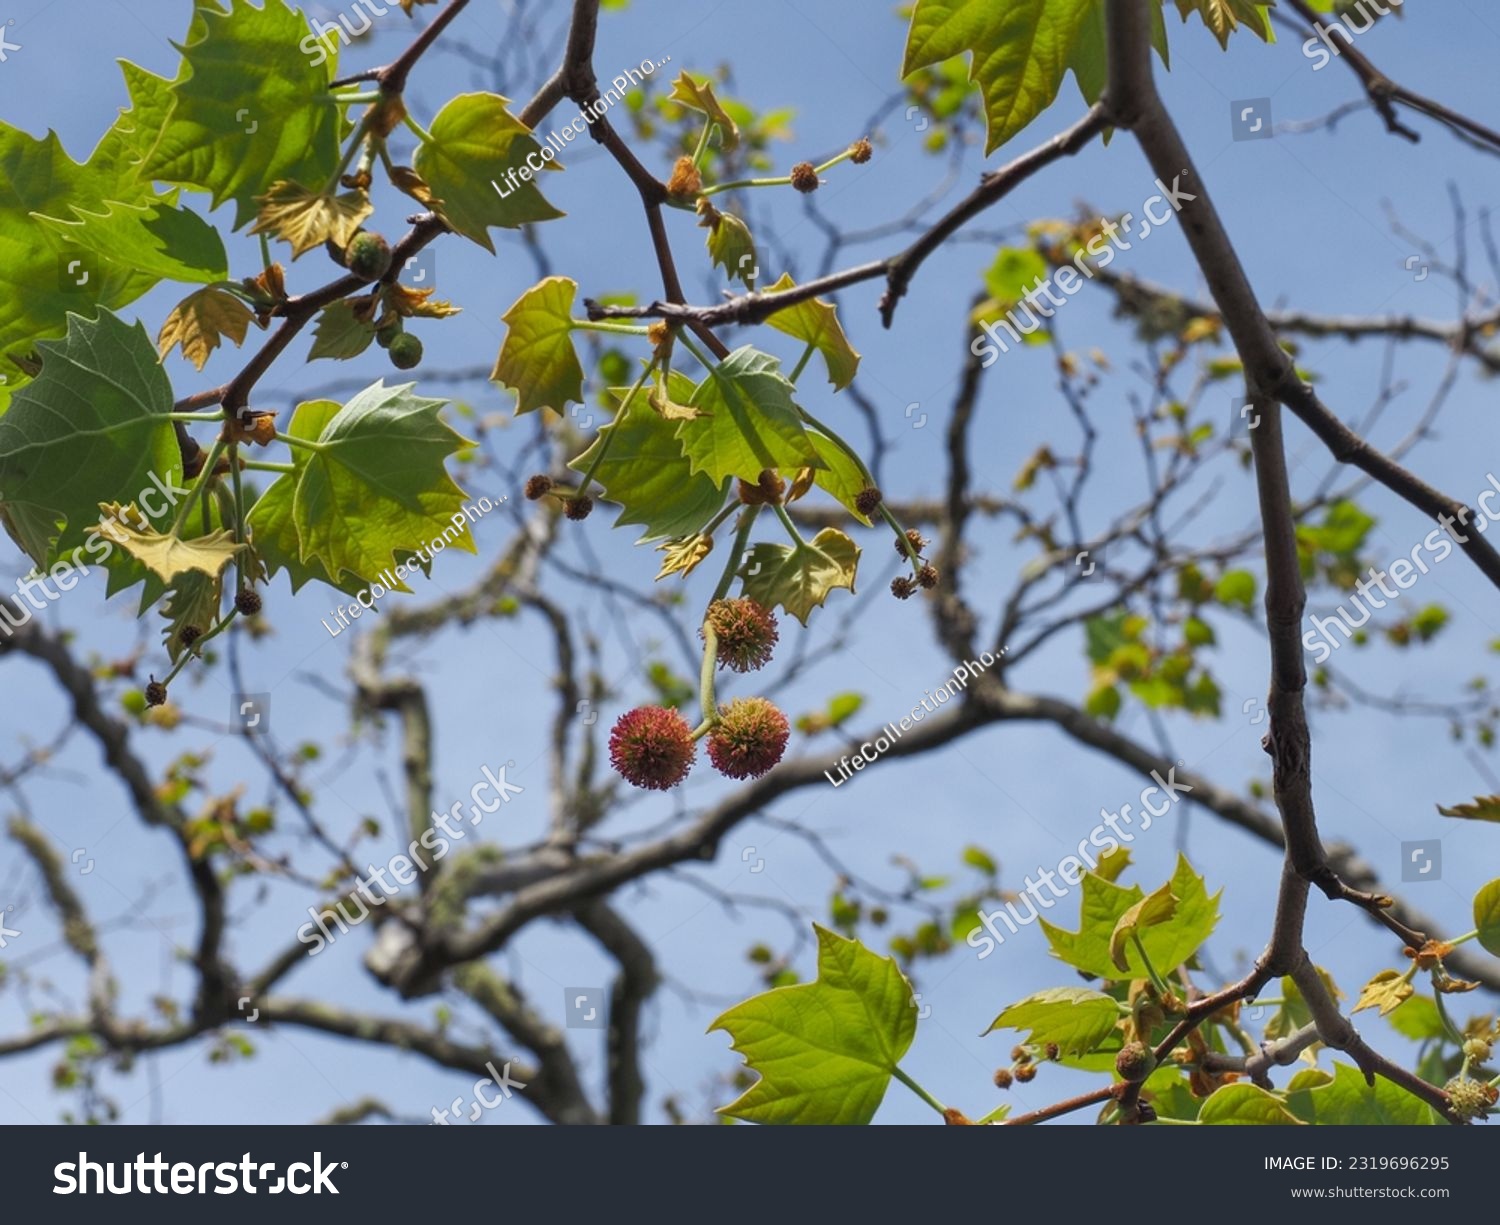 Platanus × acerifolia, branch with maple-like leaves, seed pods and flowers, against blue sky. Platanus × hispanica or London plane is a large deciduous tree of the plane-tree family Platanaceae. #2319696295